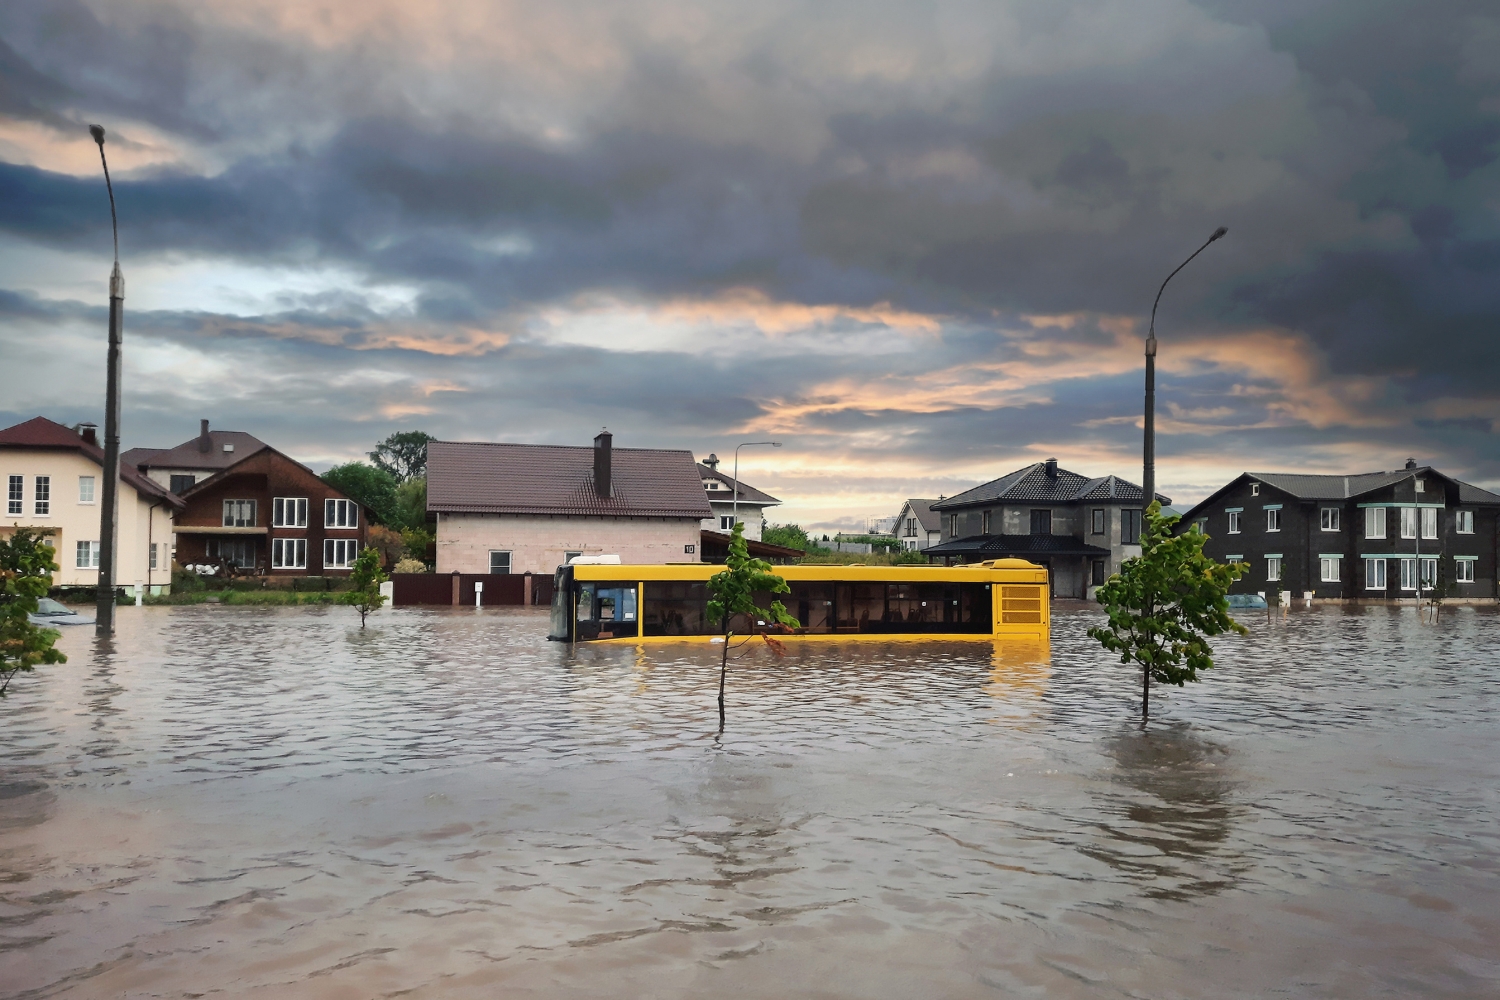 A yellow schoolbus in high waters on a flooded neighborhood street